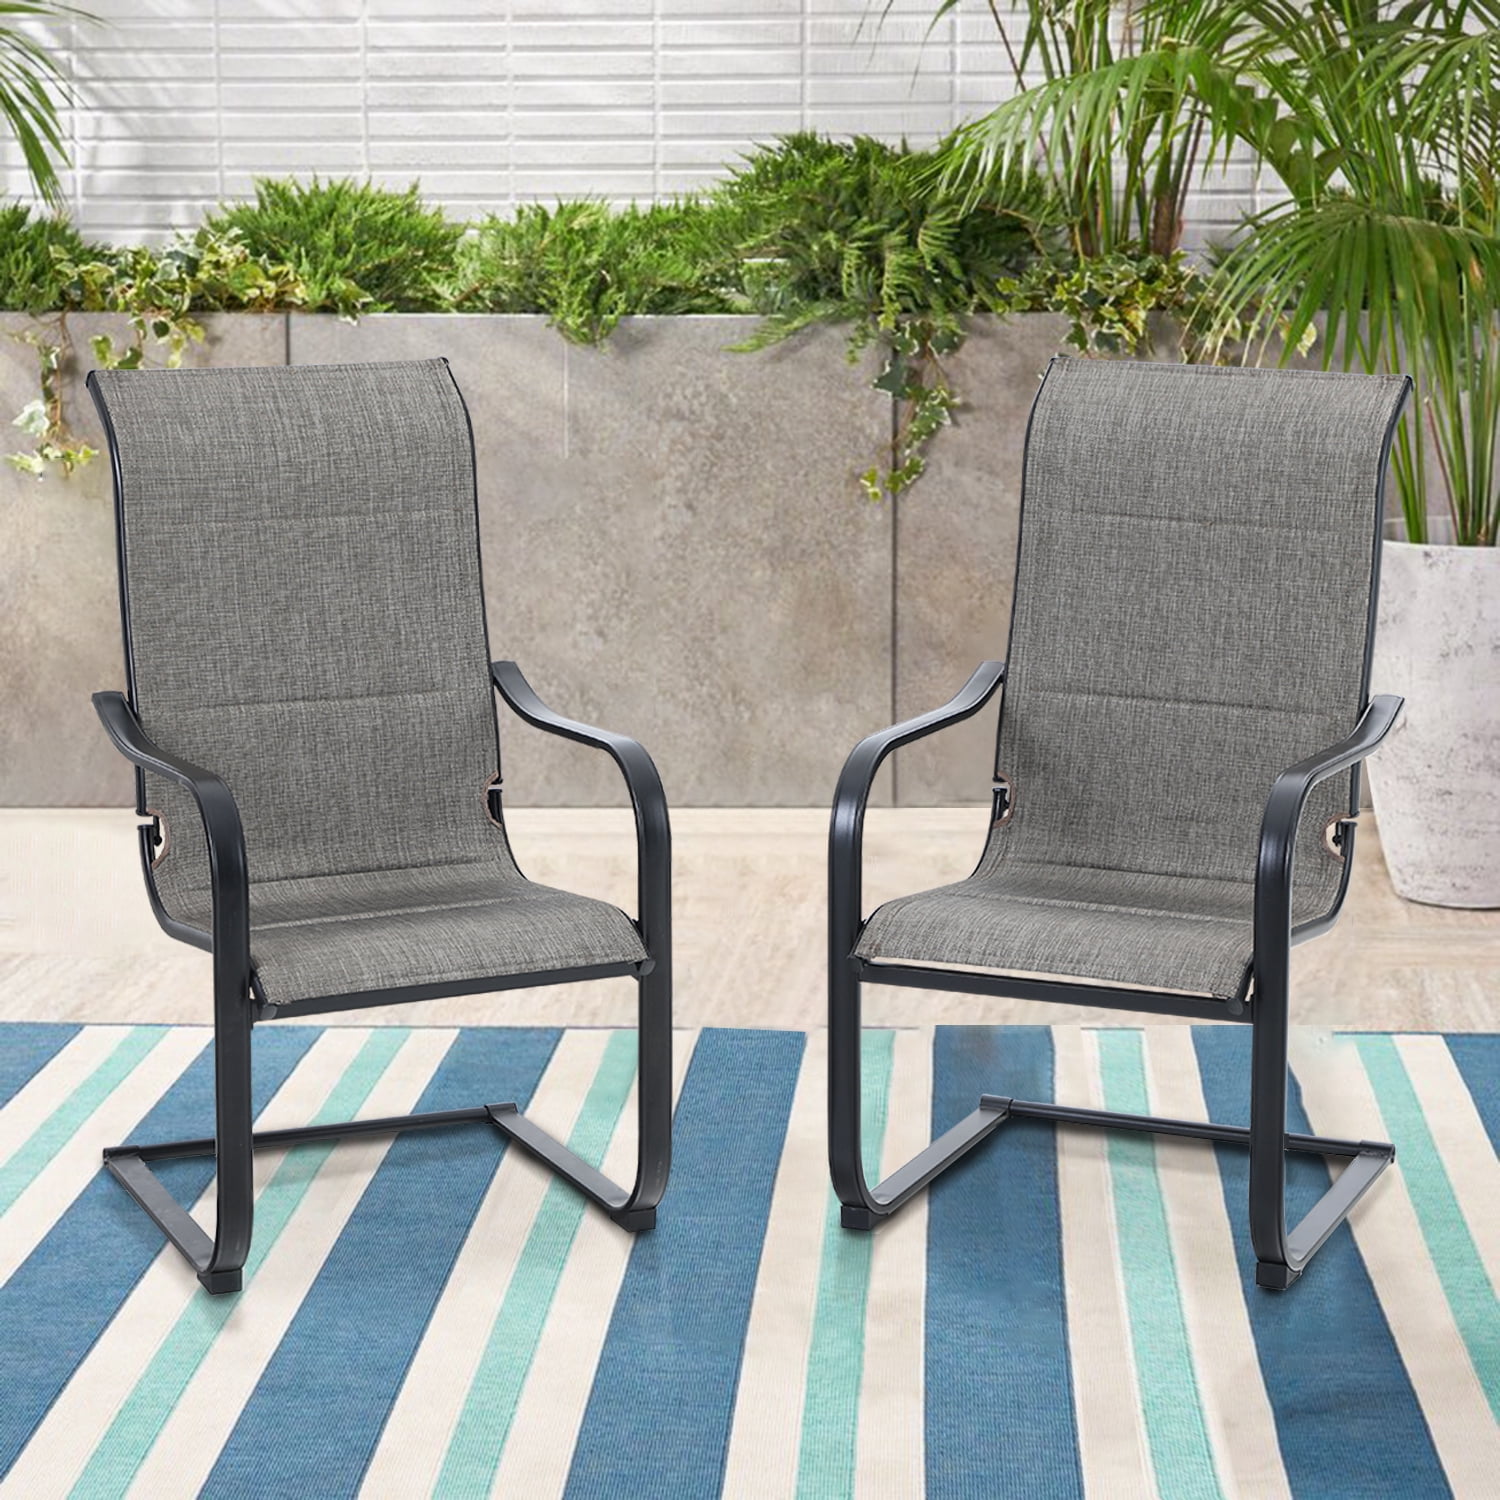 2PCS Patio Chairs Outdoor Dining Chairs with Armrest for Porch Backyard Beige 